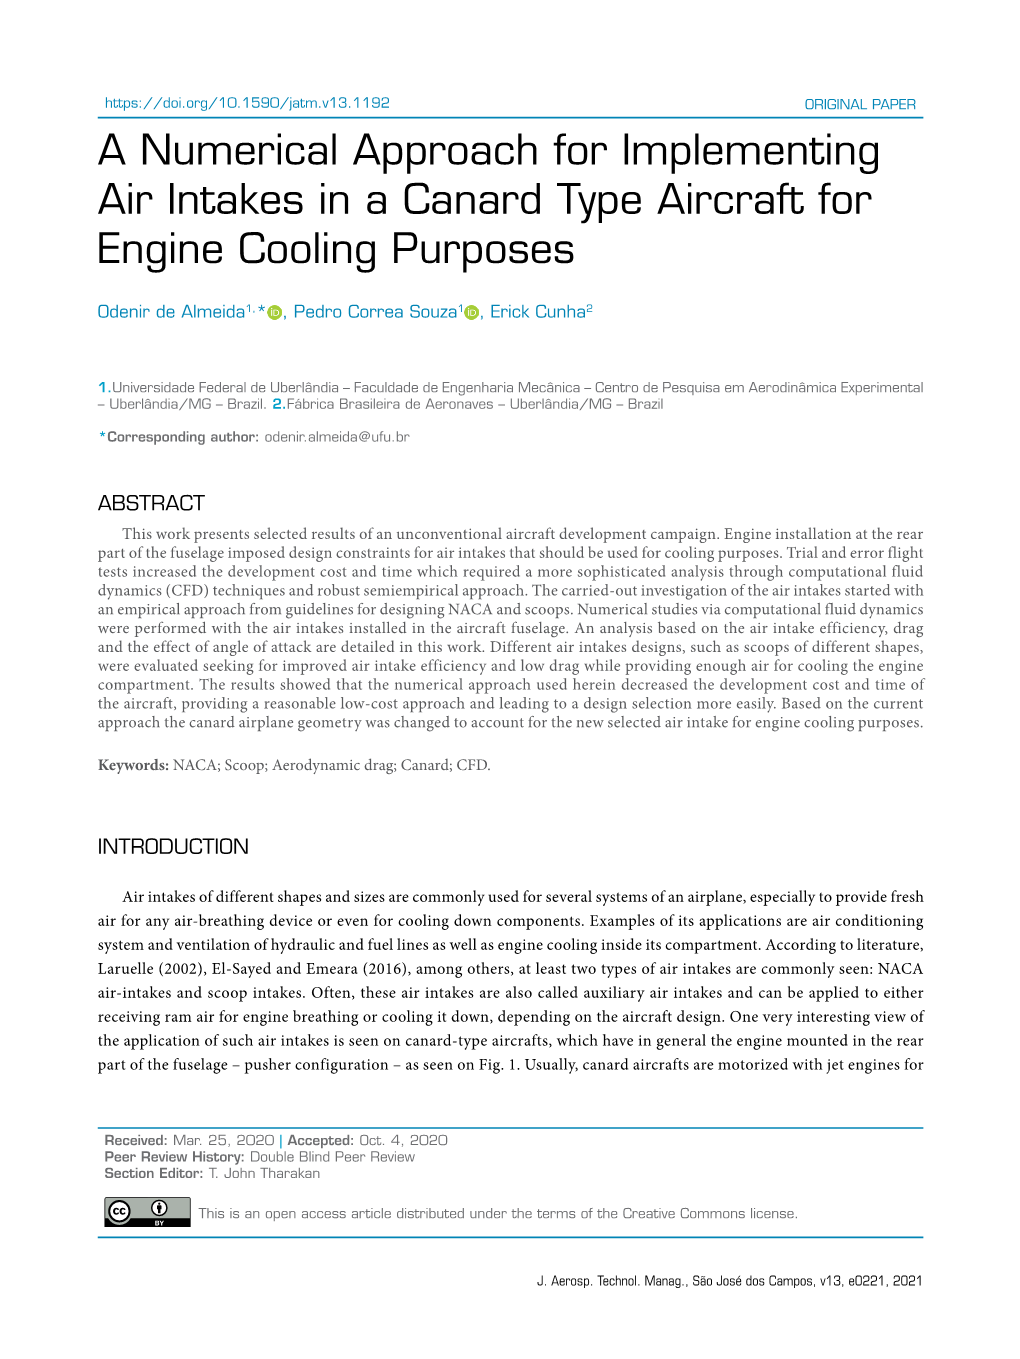 A Numerical Approach for Implementing Air Intakes in a Canard Type Aircraft for Engine Cooling Purposes